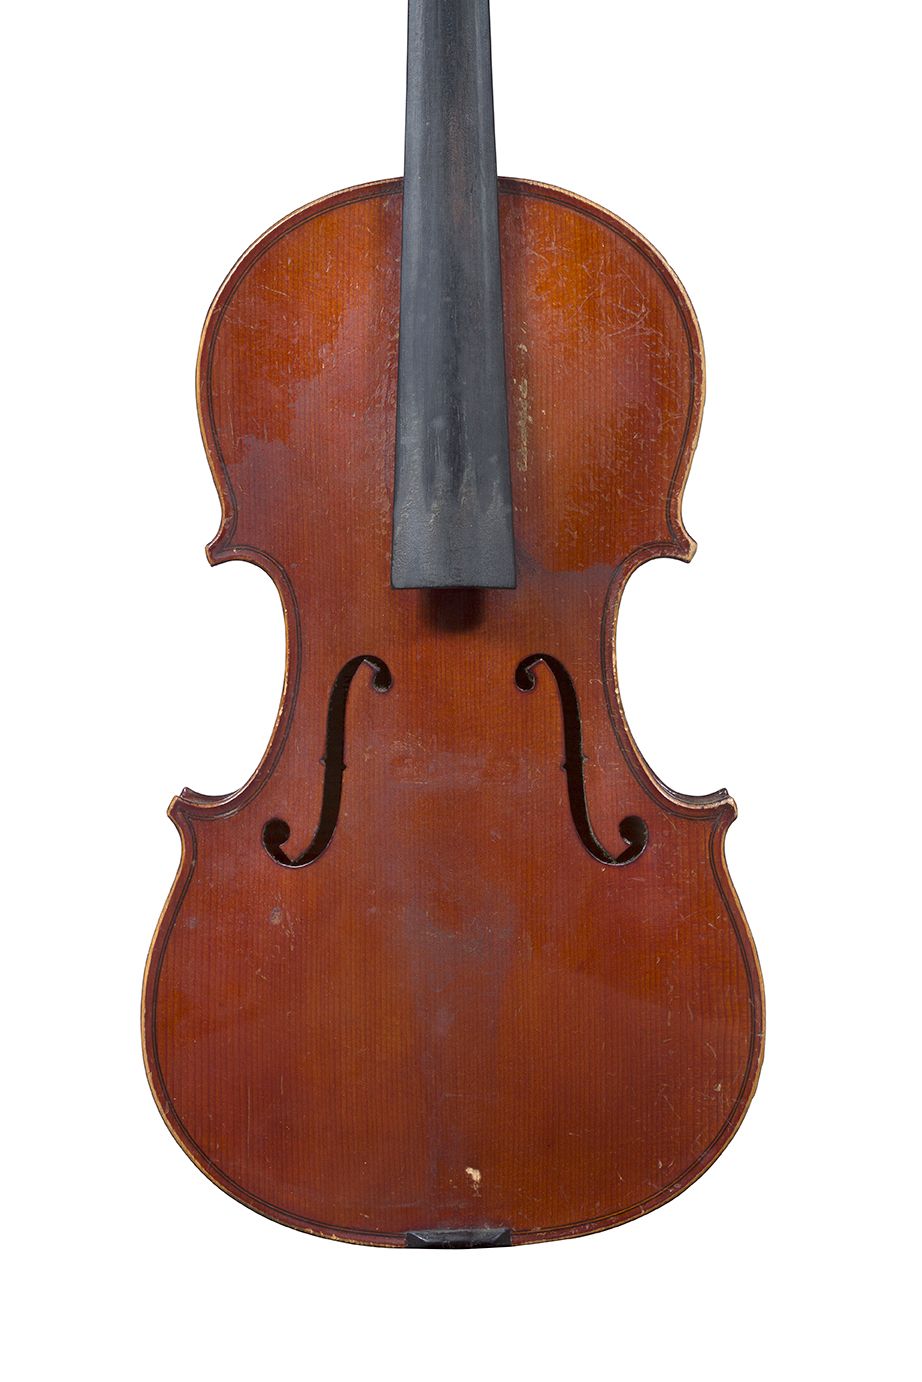 Null A French Violin by Maison Laberte, late 19th century